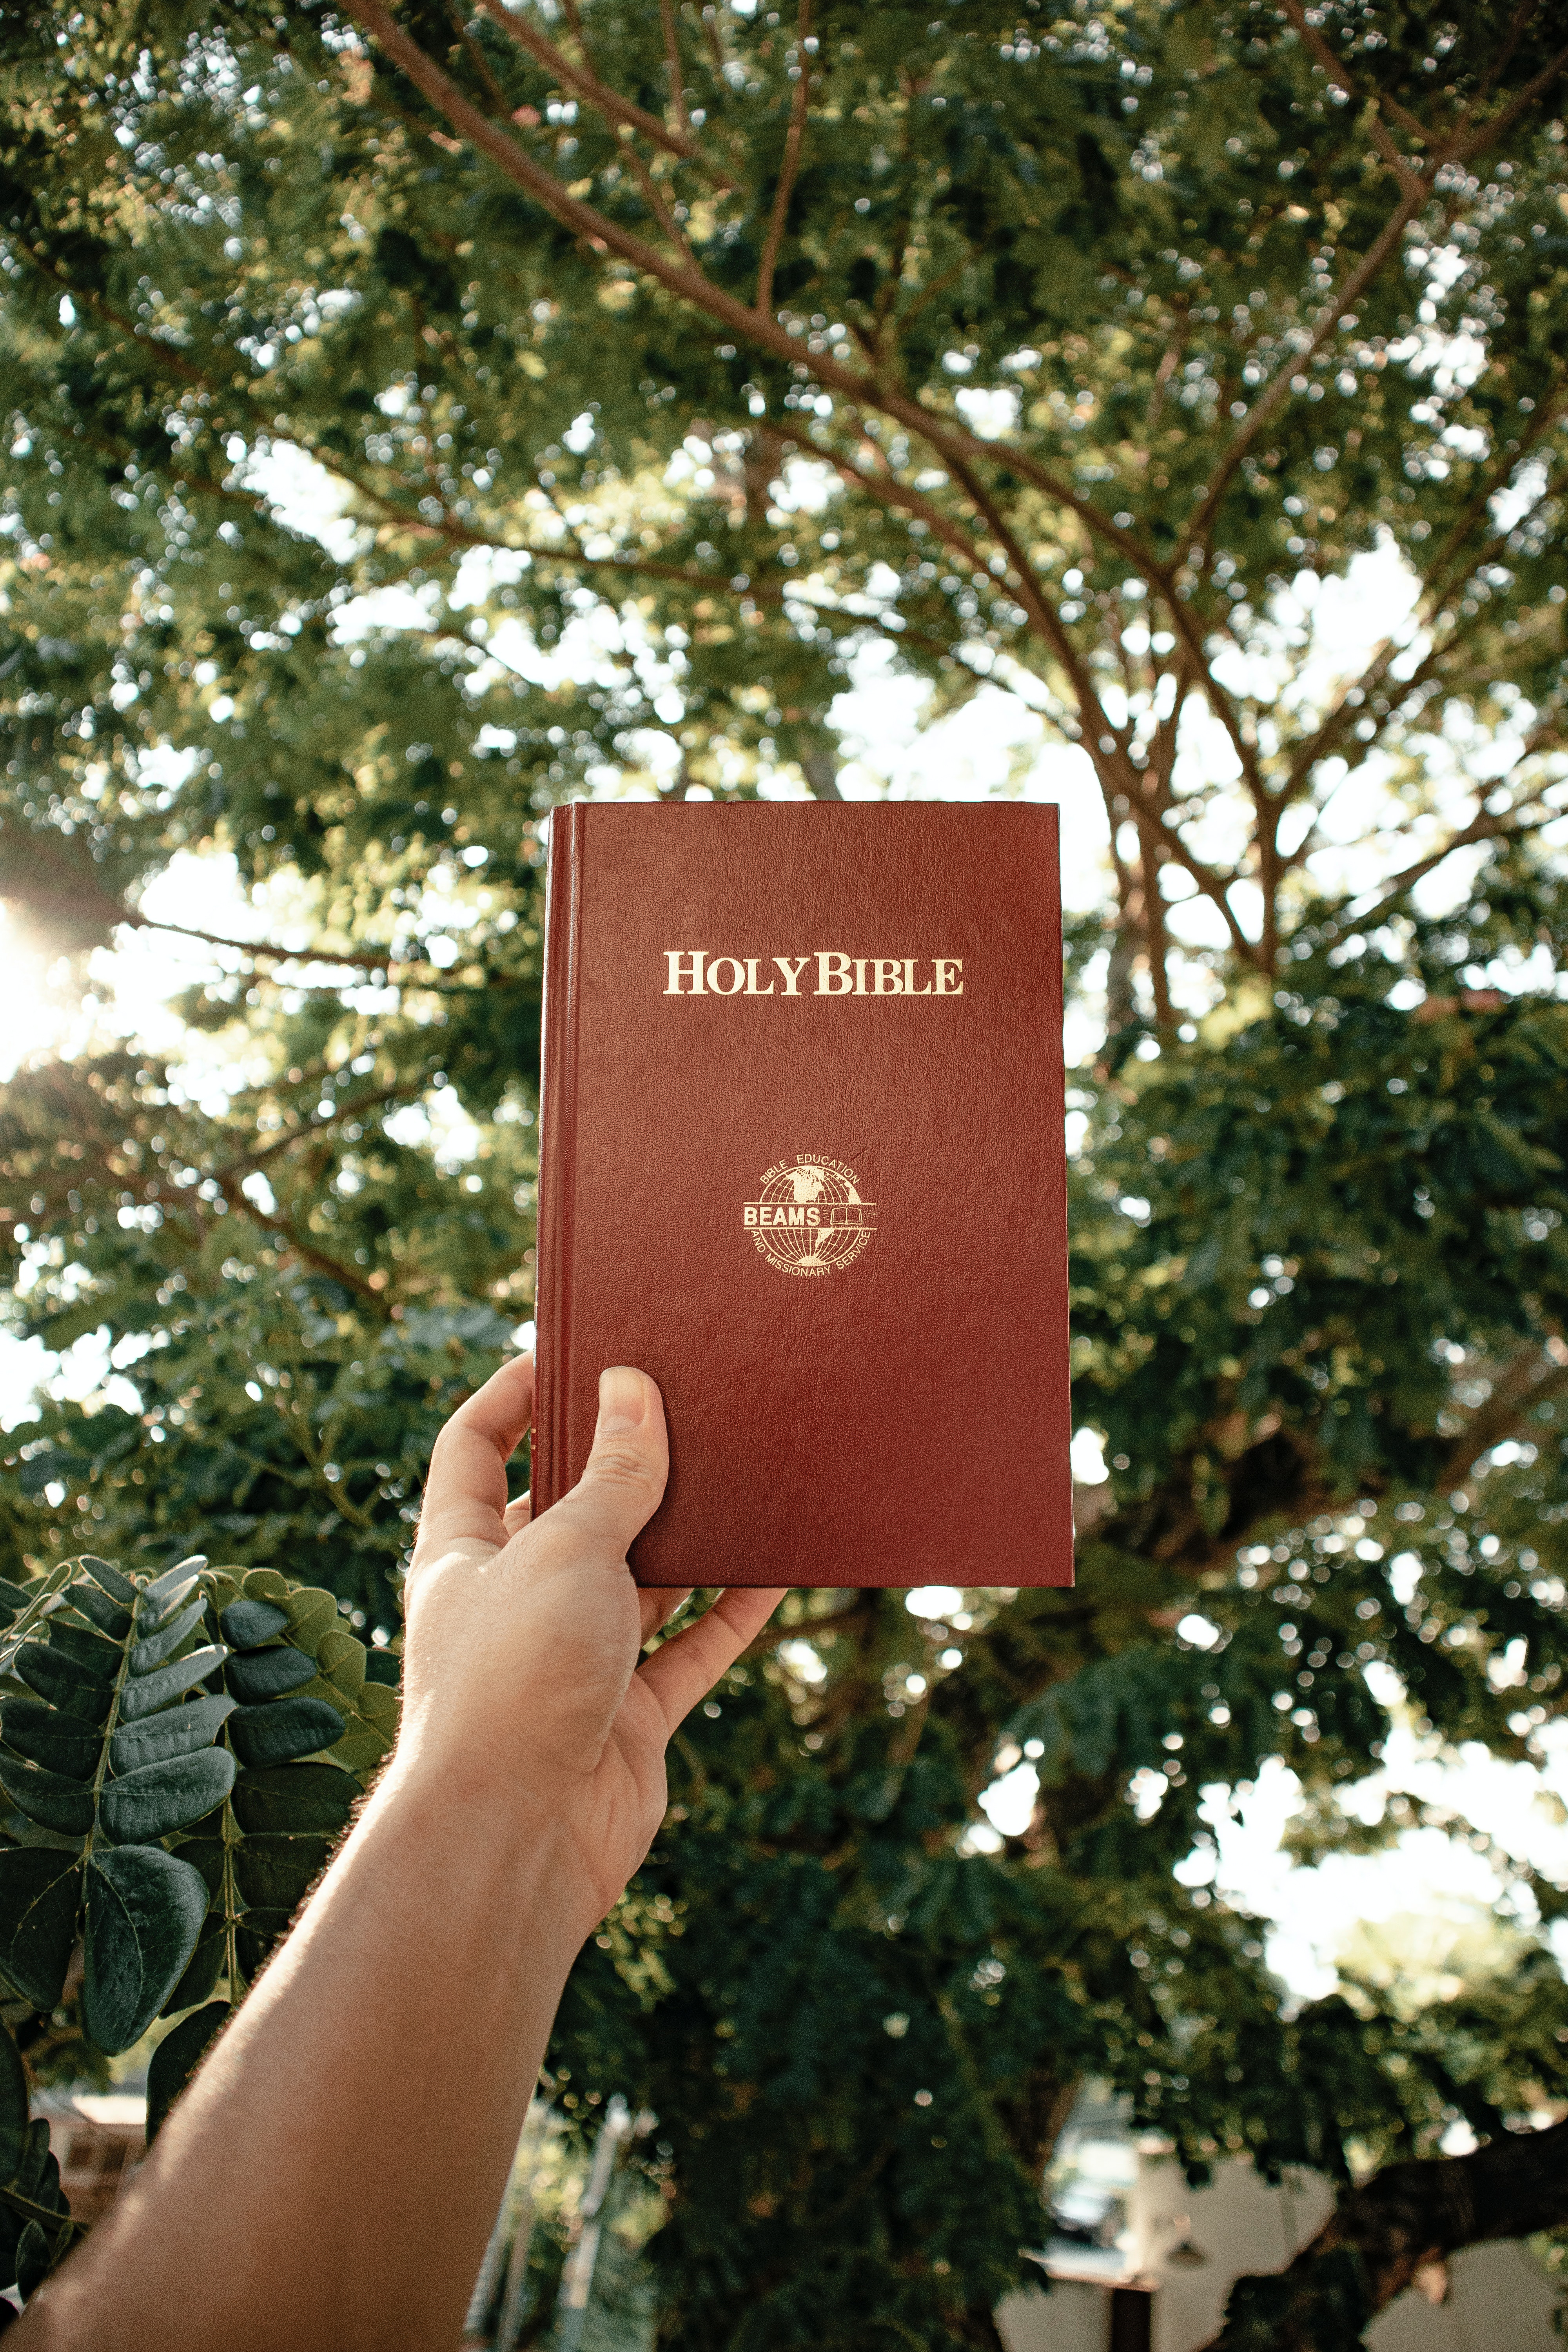 Someone holding up a brown leather Bible against the background of trees